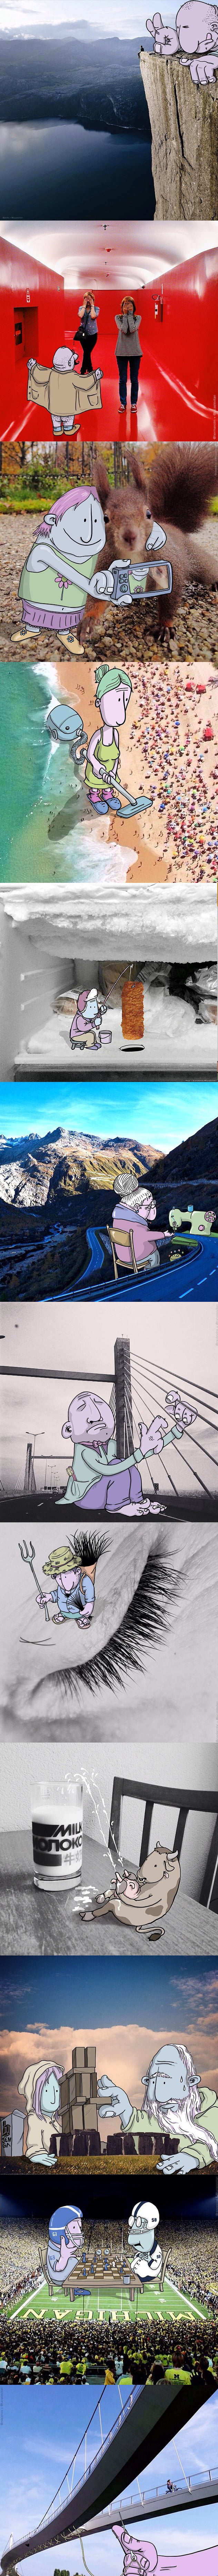 Illustrator adds cartoons to real life photos and they are awesome! (Part 2)